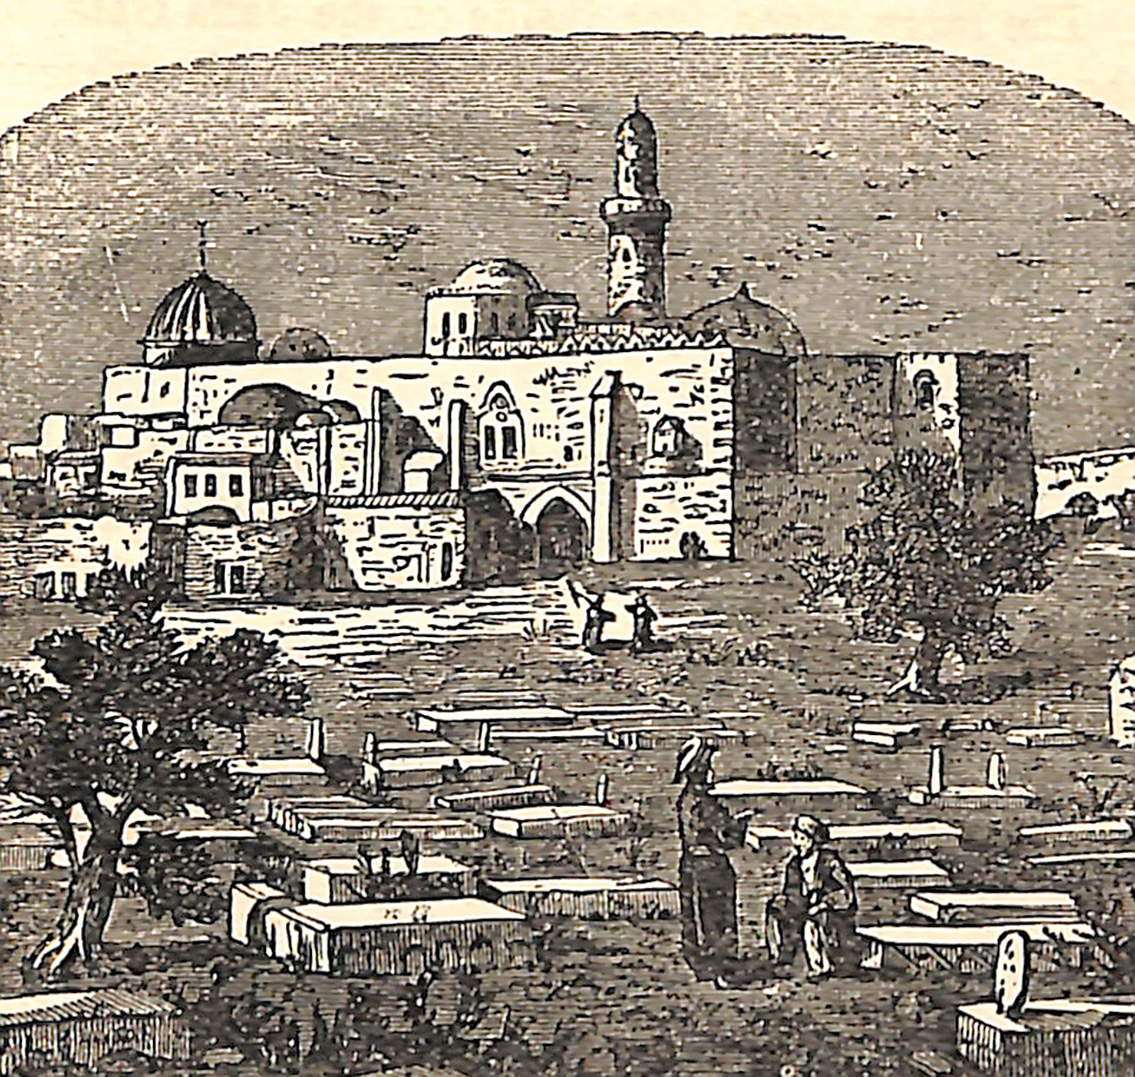 David Mosque, and Tomb.